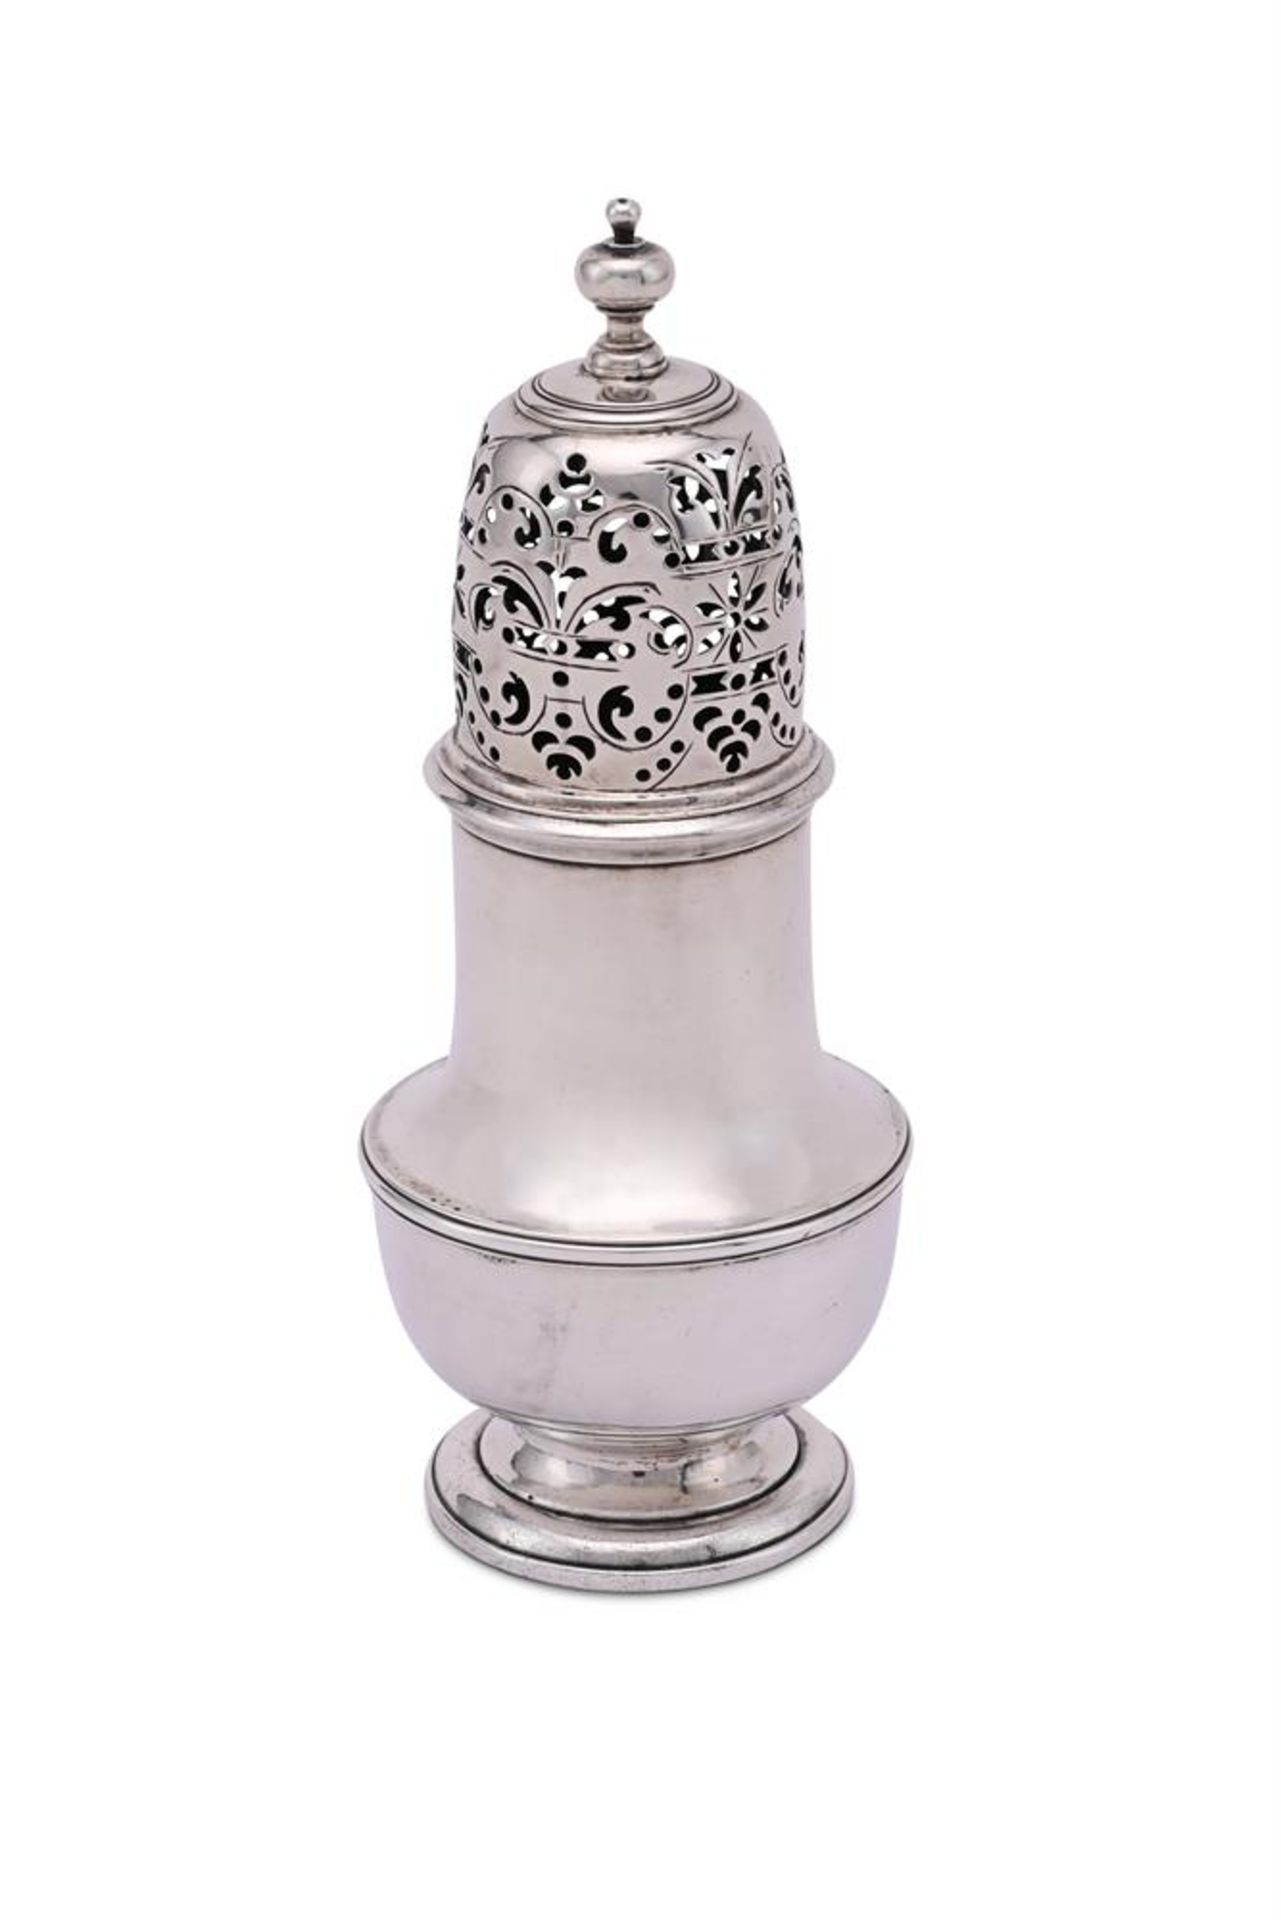 A GEORGE II SILVER BALUSTER CASTER